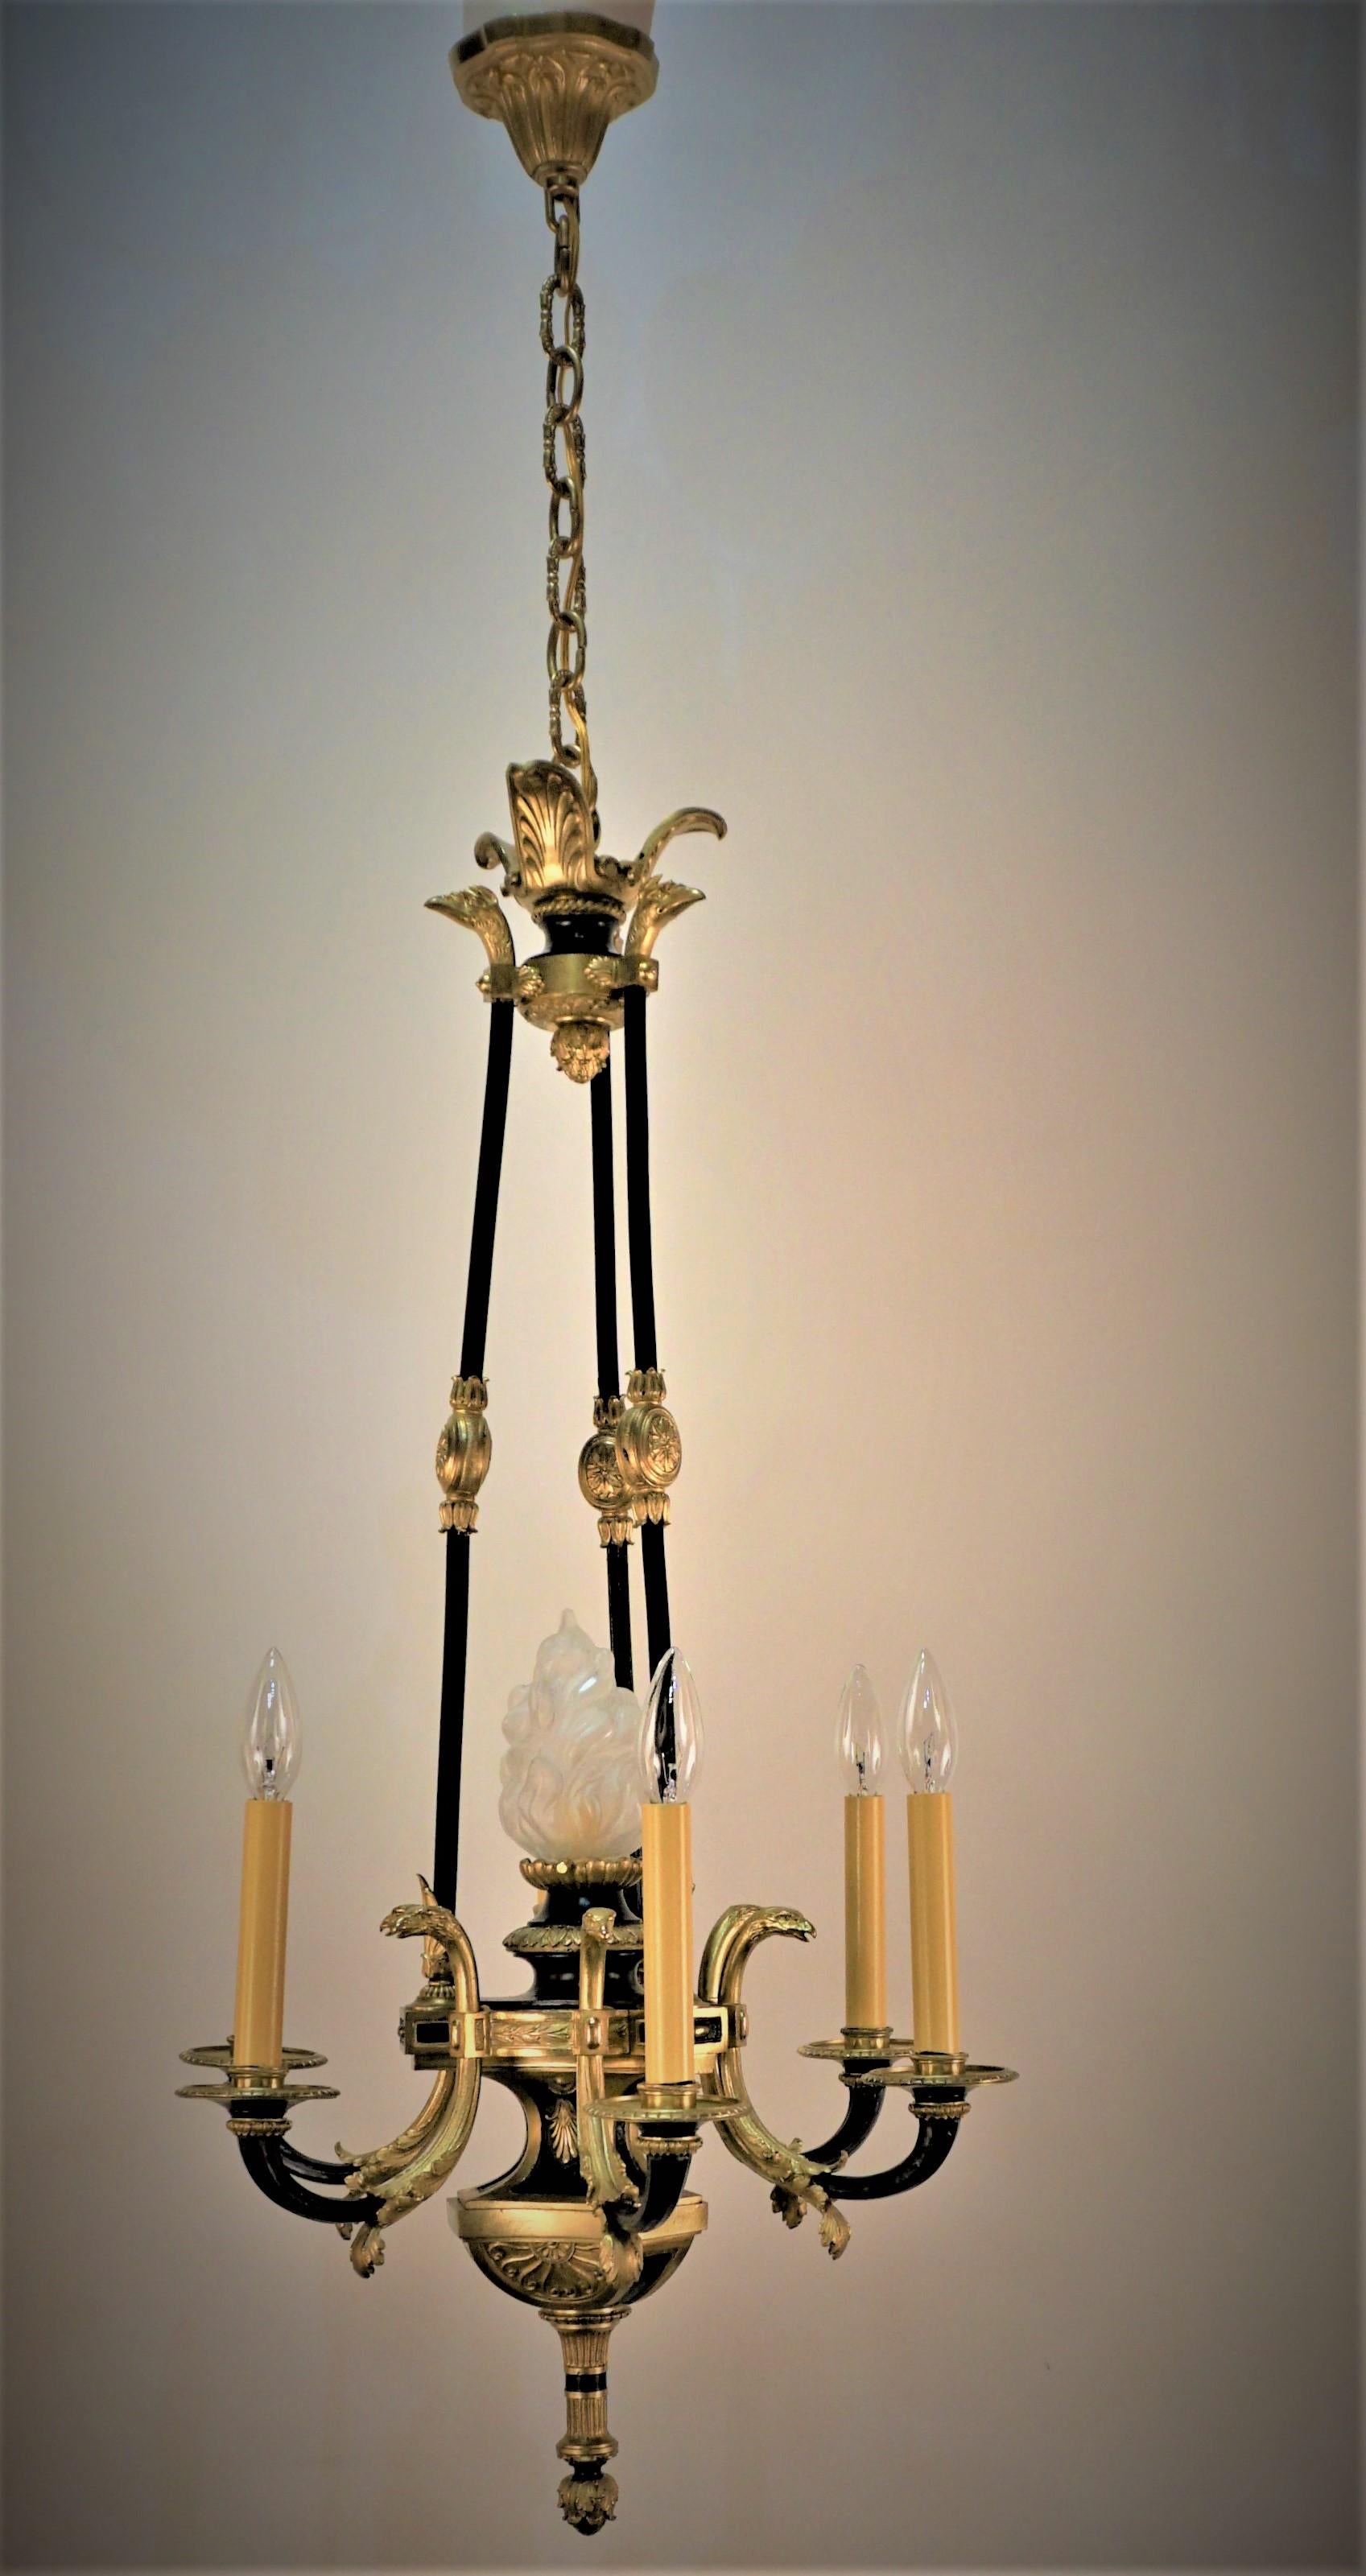 This fabulous empire chandelier. This stunning fixture is made of beautiful black lacquer and ornate bronze.
Professionally rewired and ready for installation.
Seven lights, 60 watts max each.